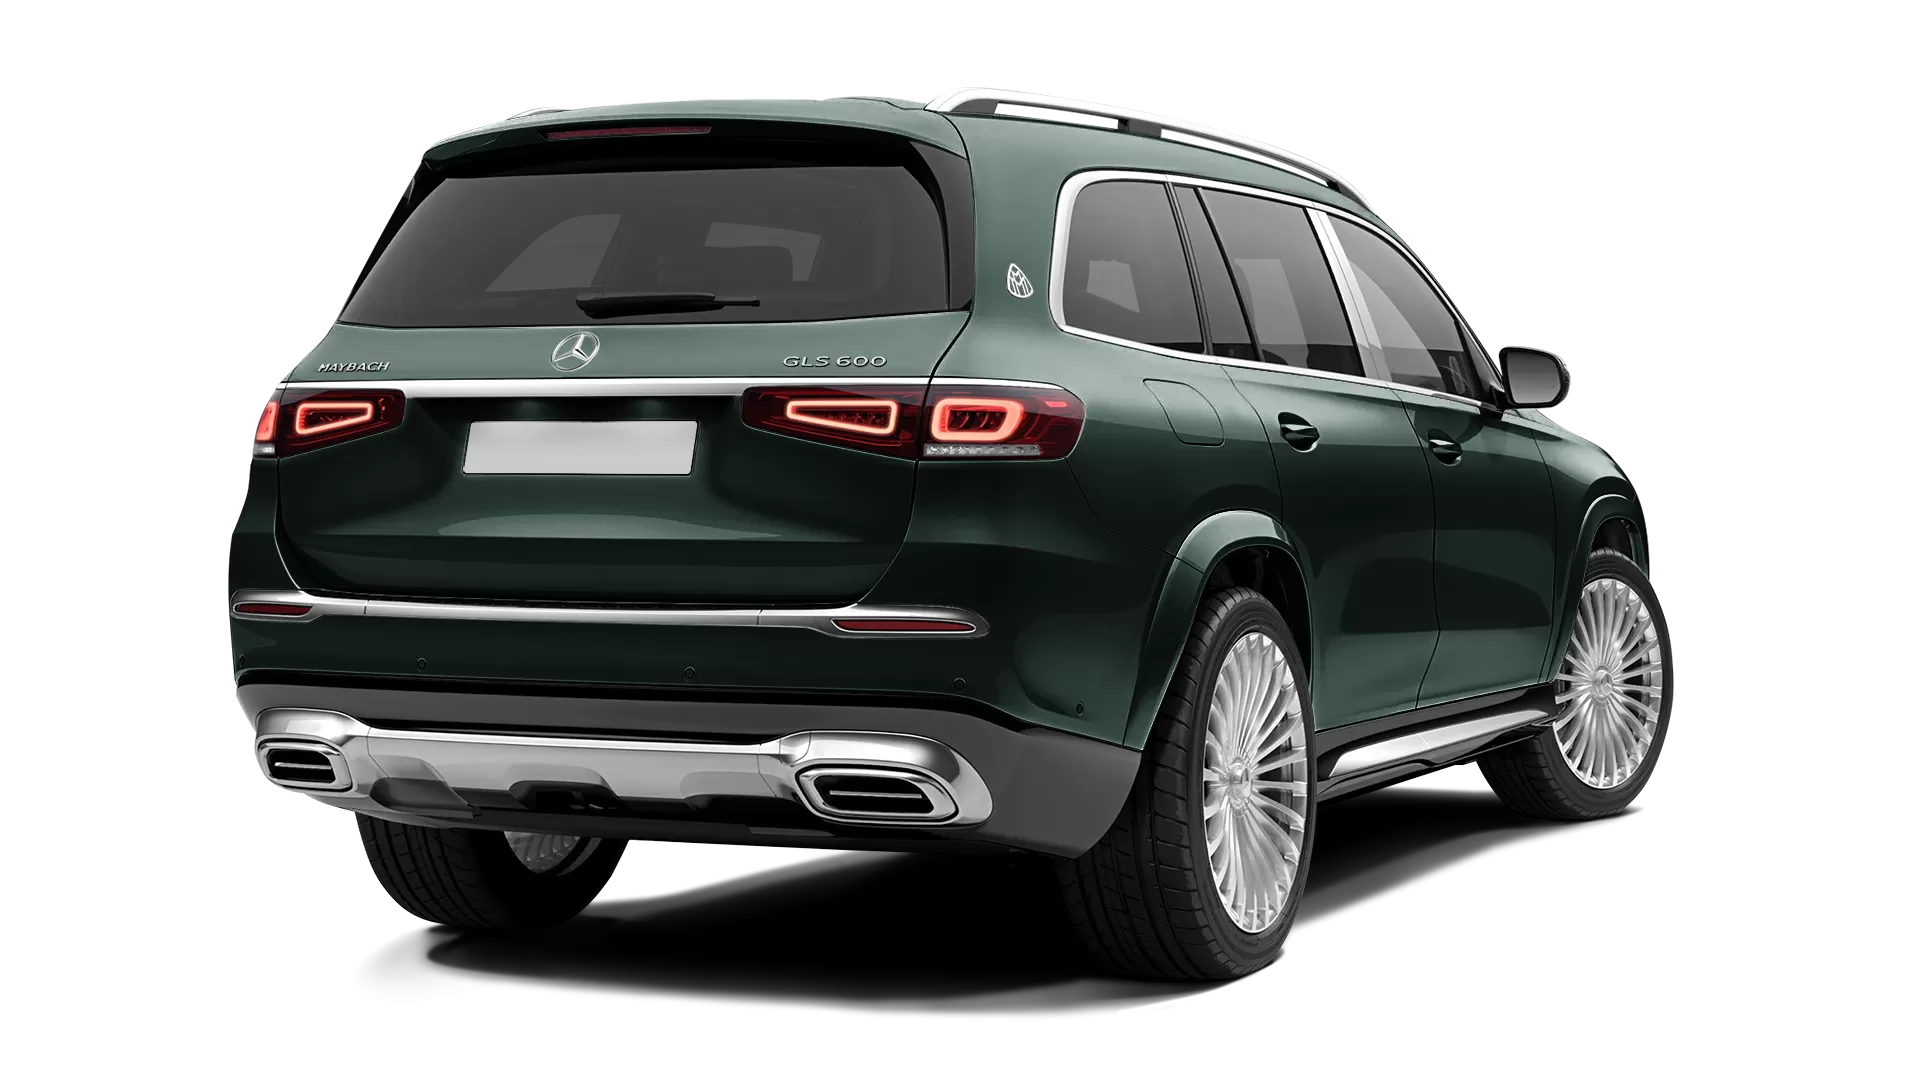 Mercedes Maybach GLS 600 stock rear view in Emerald Green color